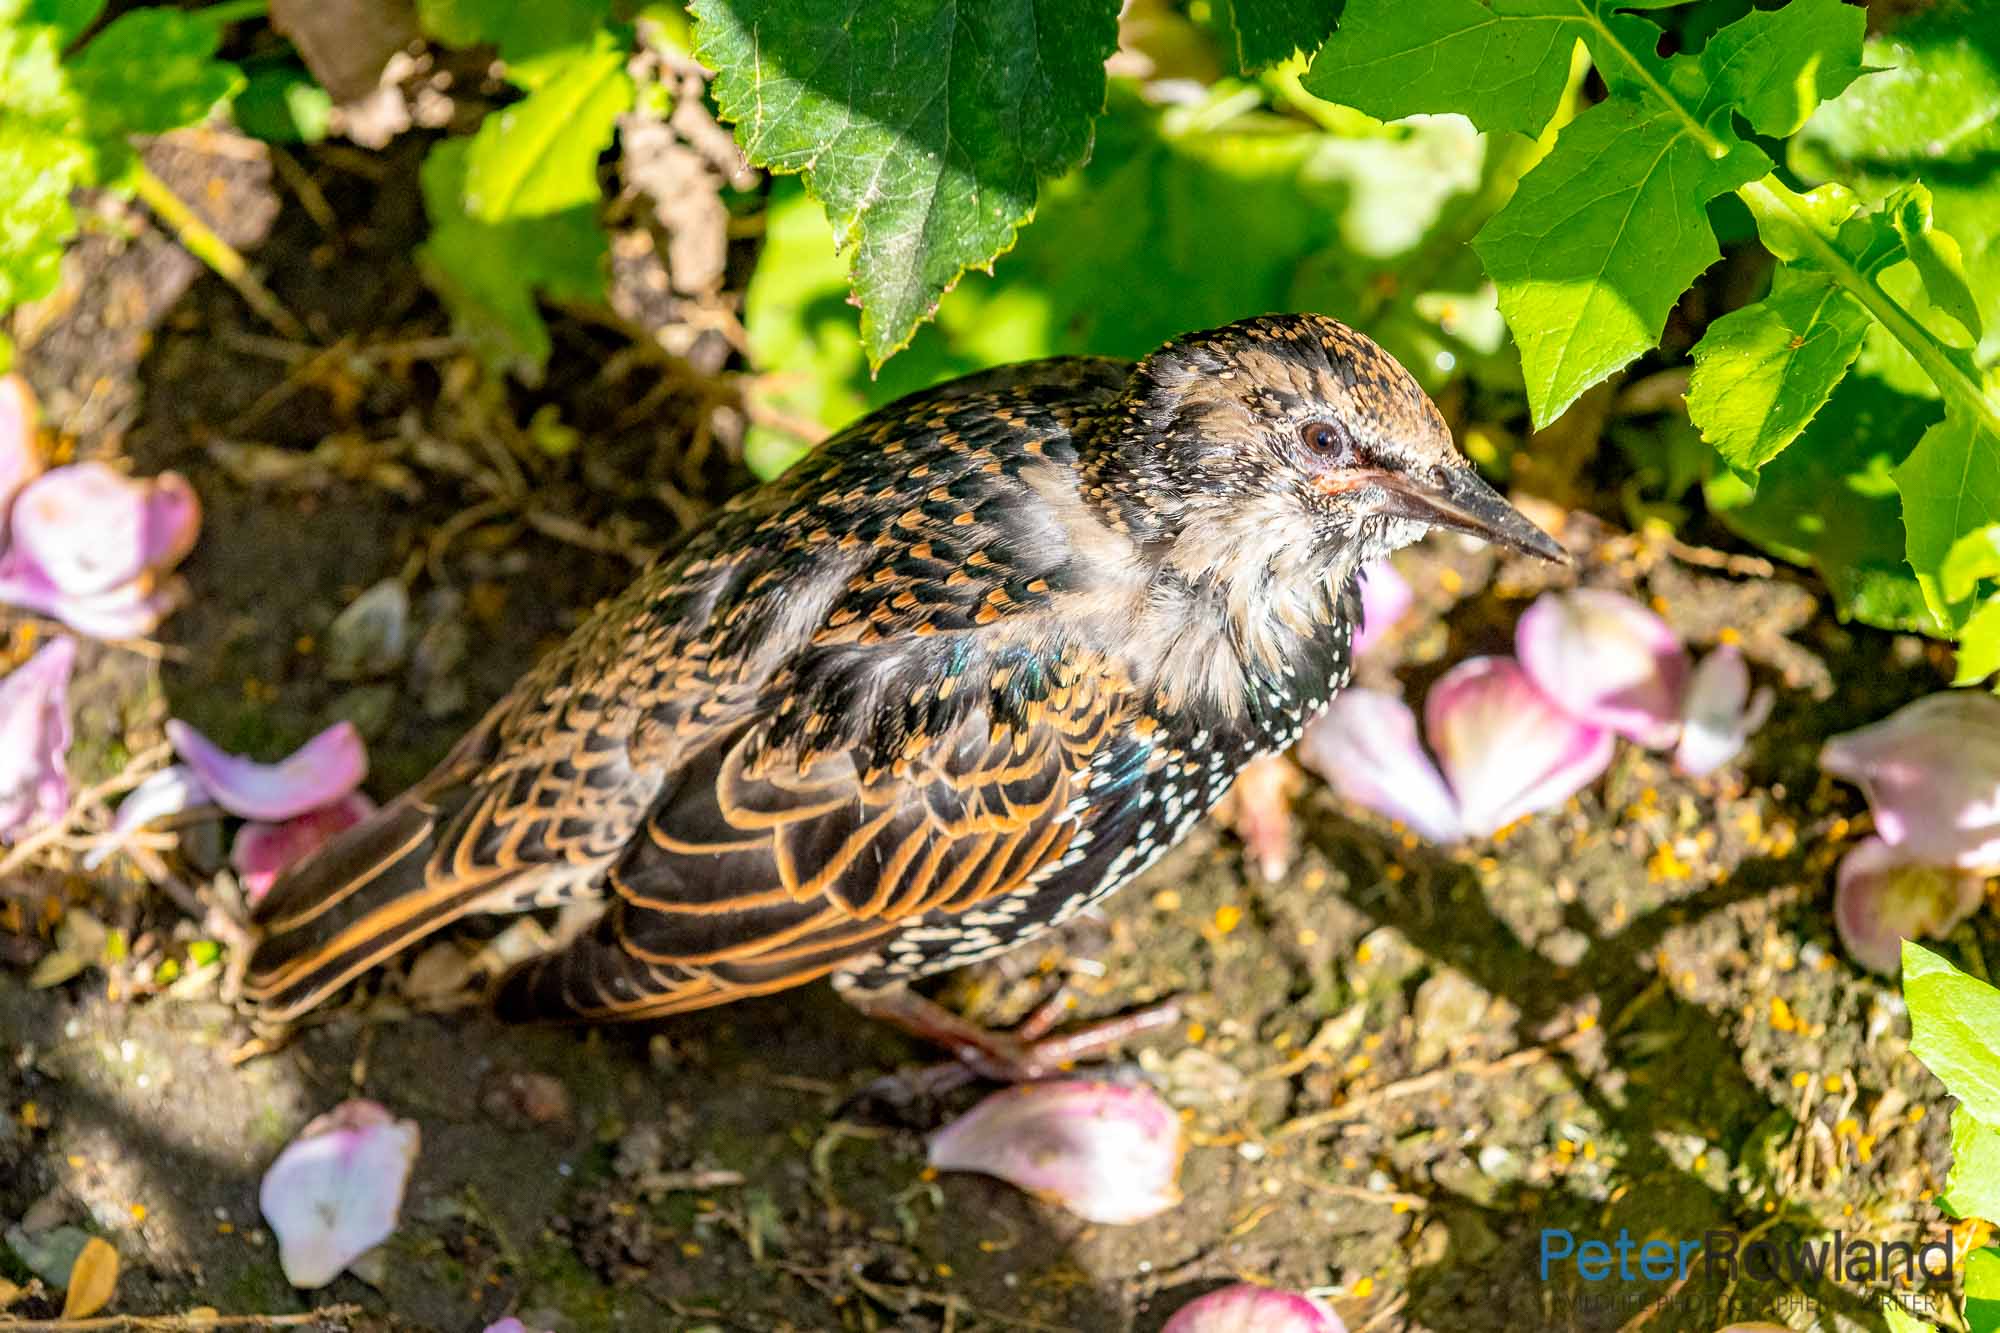 A European Starling walking over the ground amongst some fallen flowers and low shrubs